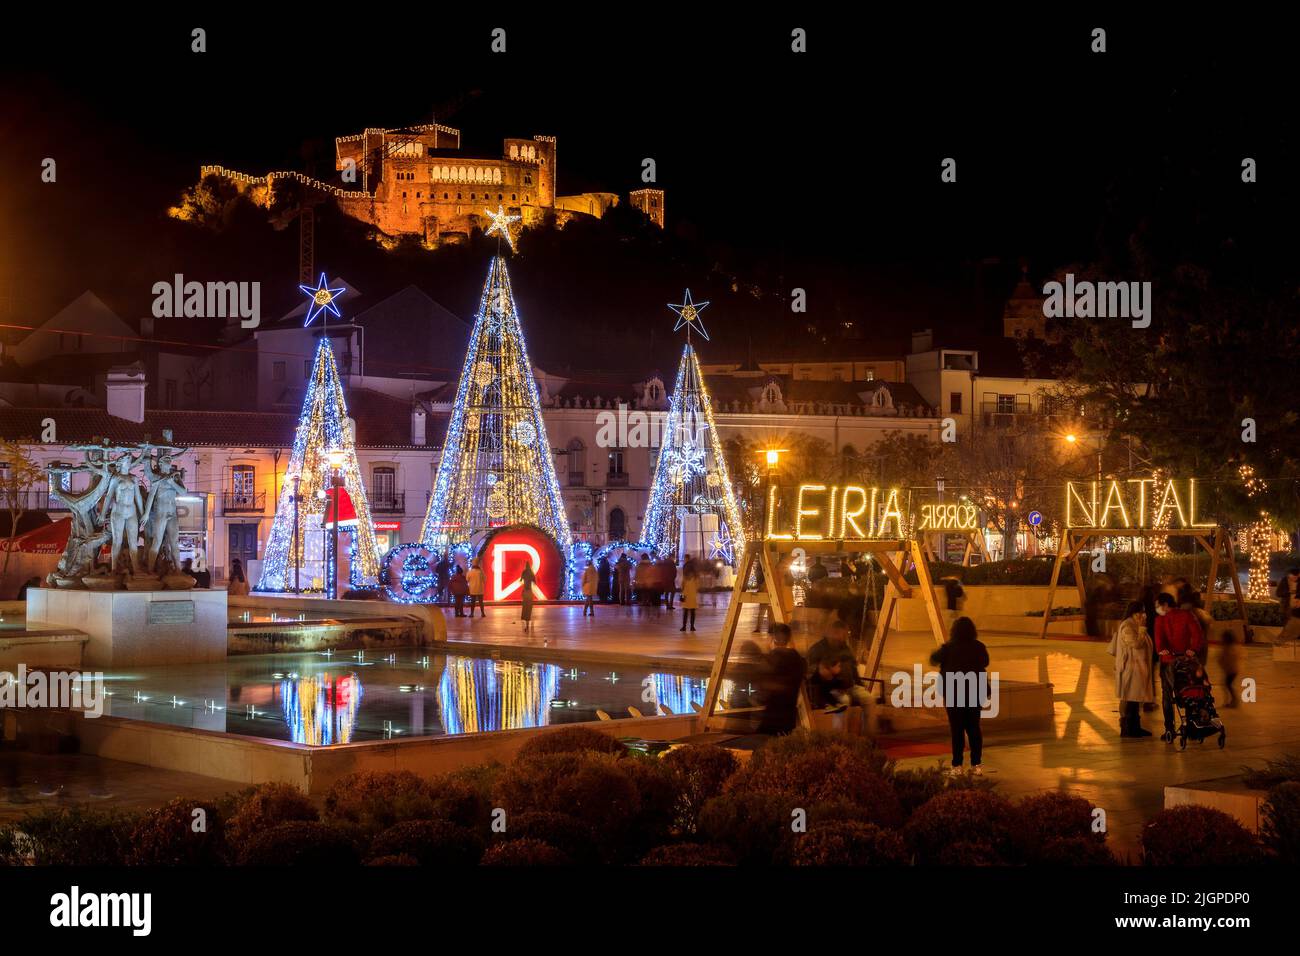 Leiria, Portugal - December 8, 2021: Night view of the luminous fountain and square of the city center of Leiria in Portugal, with Christmas decoratio Stock Photo